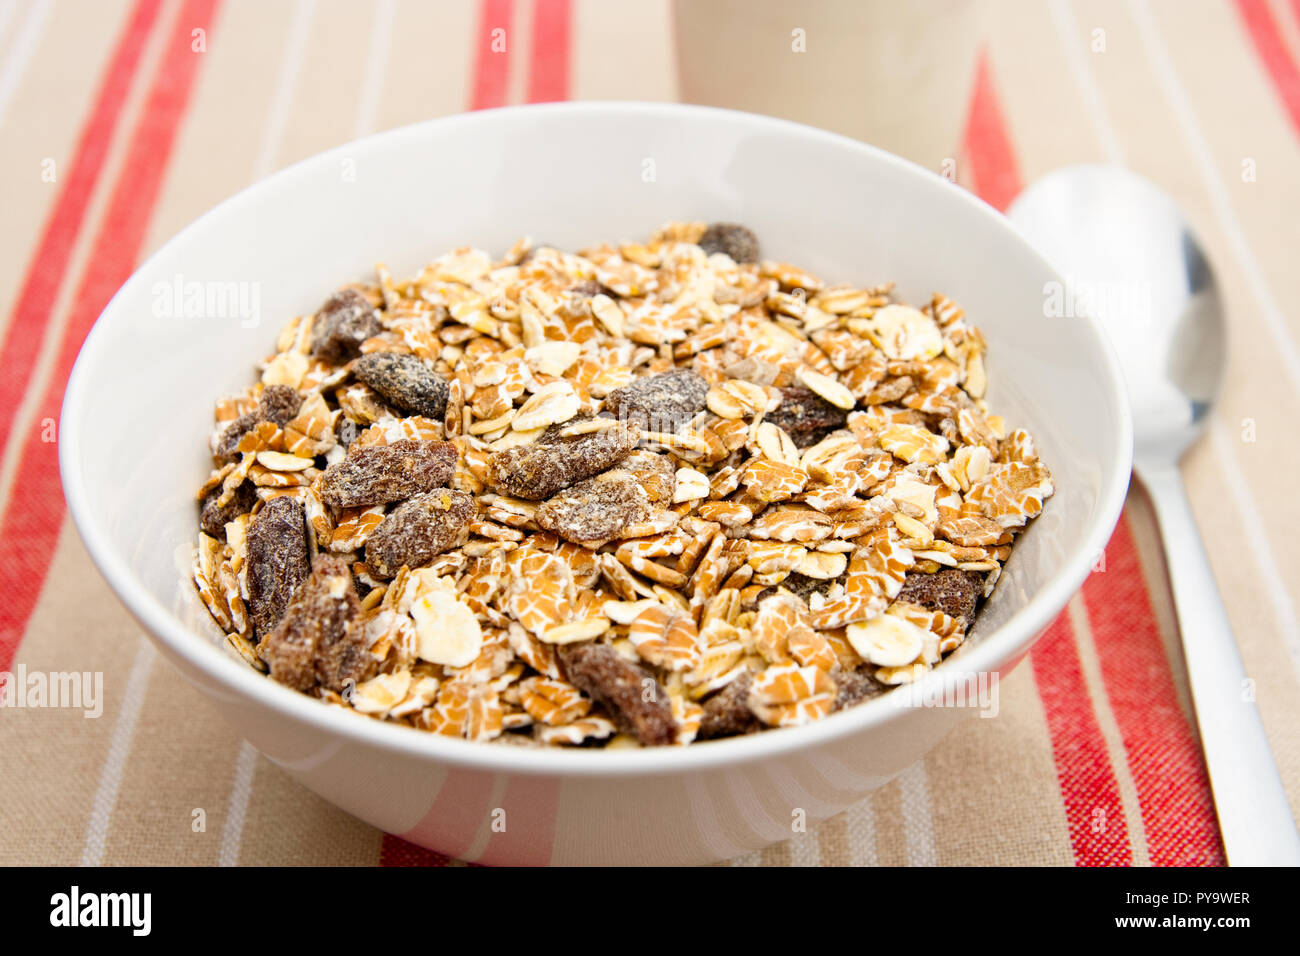 A bowl of muesli for breakfast Stock Photo